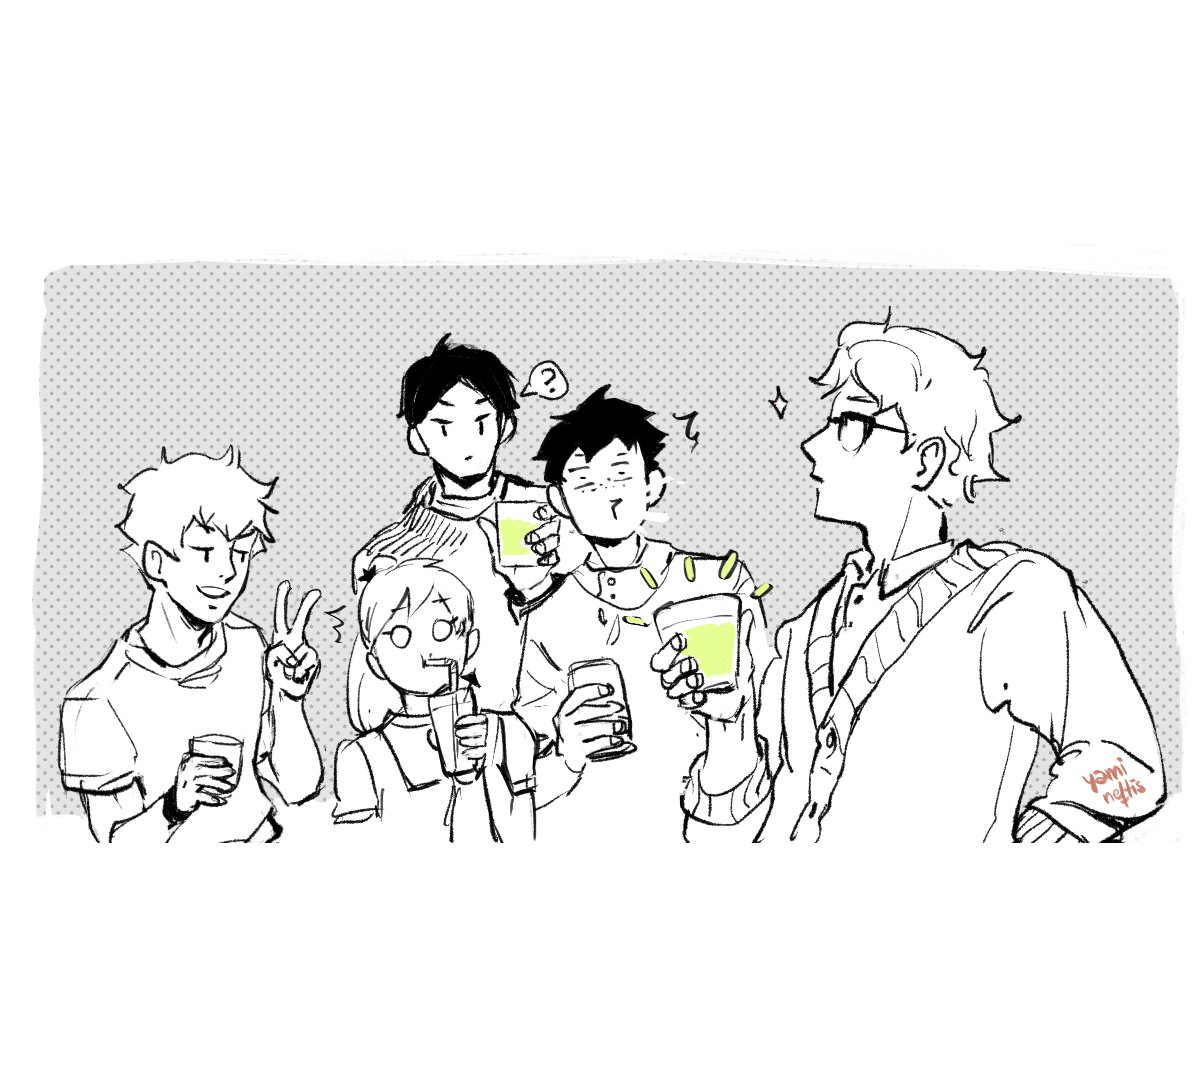 Hinata got lots of latino friends ok

and Jus is absolutely right https://t.co/sIuOQKOwMo 